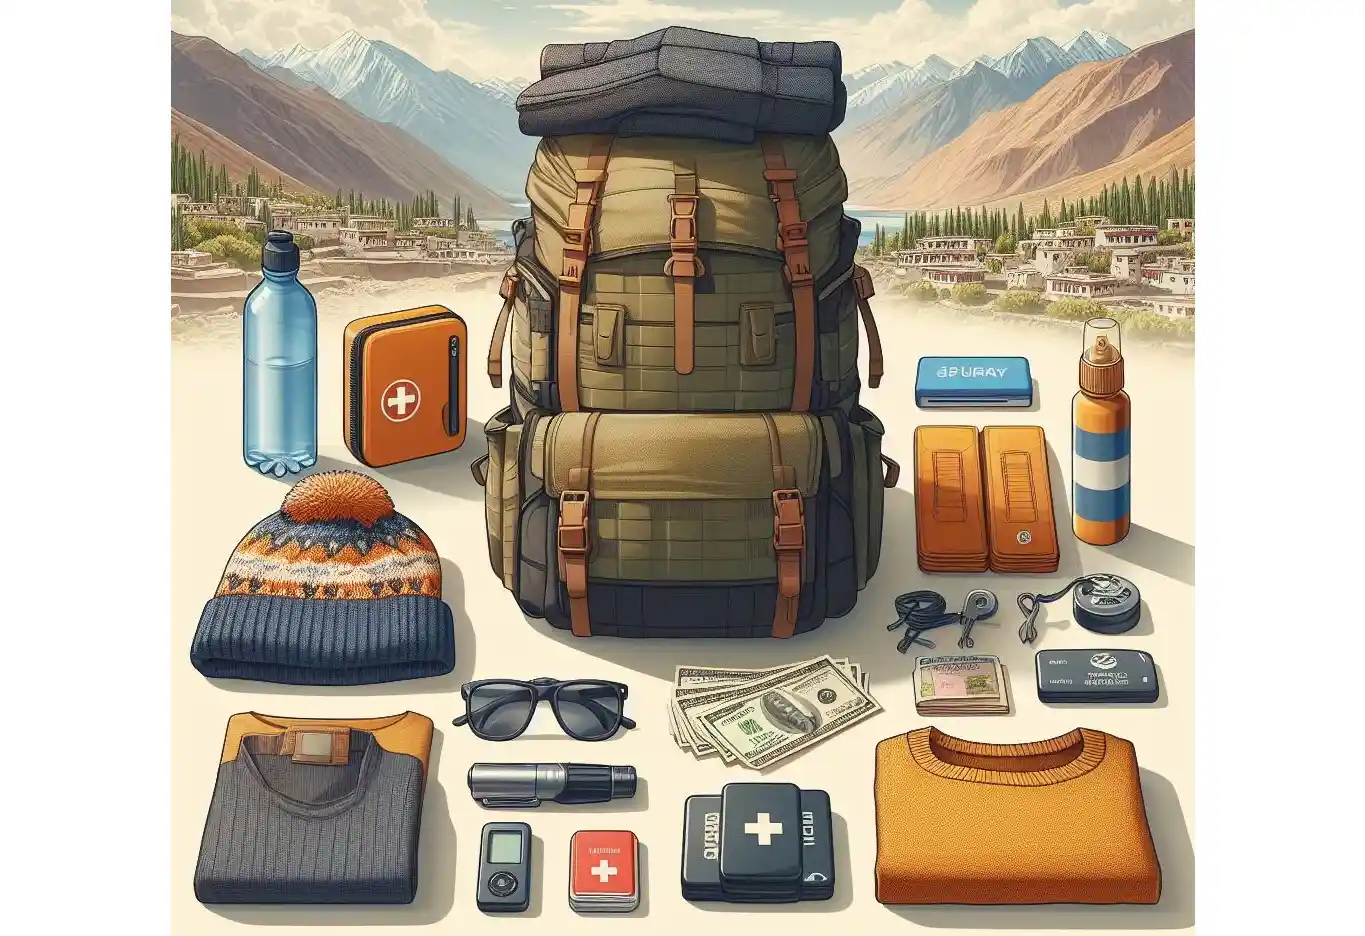 Saser pass, things to carry